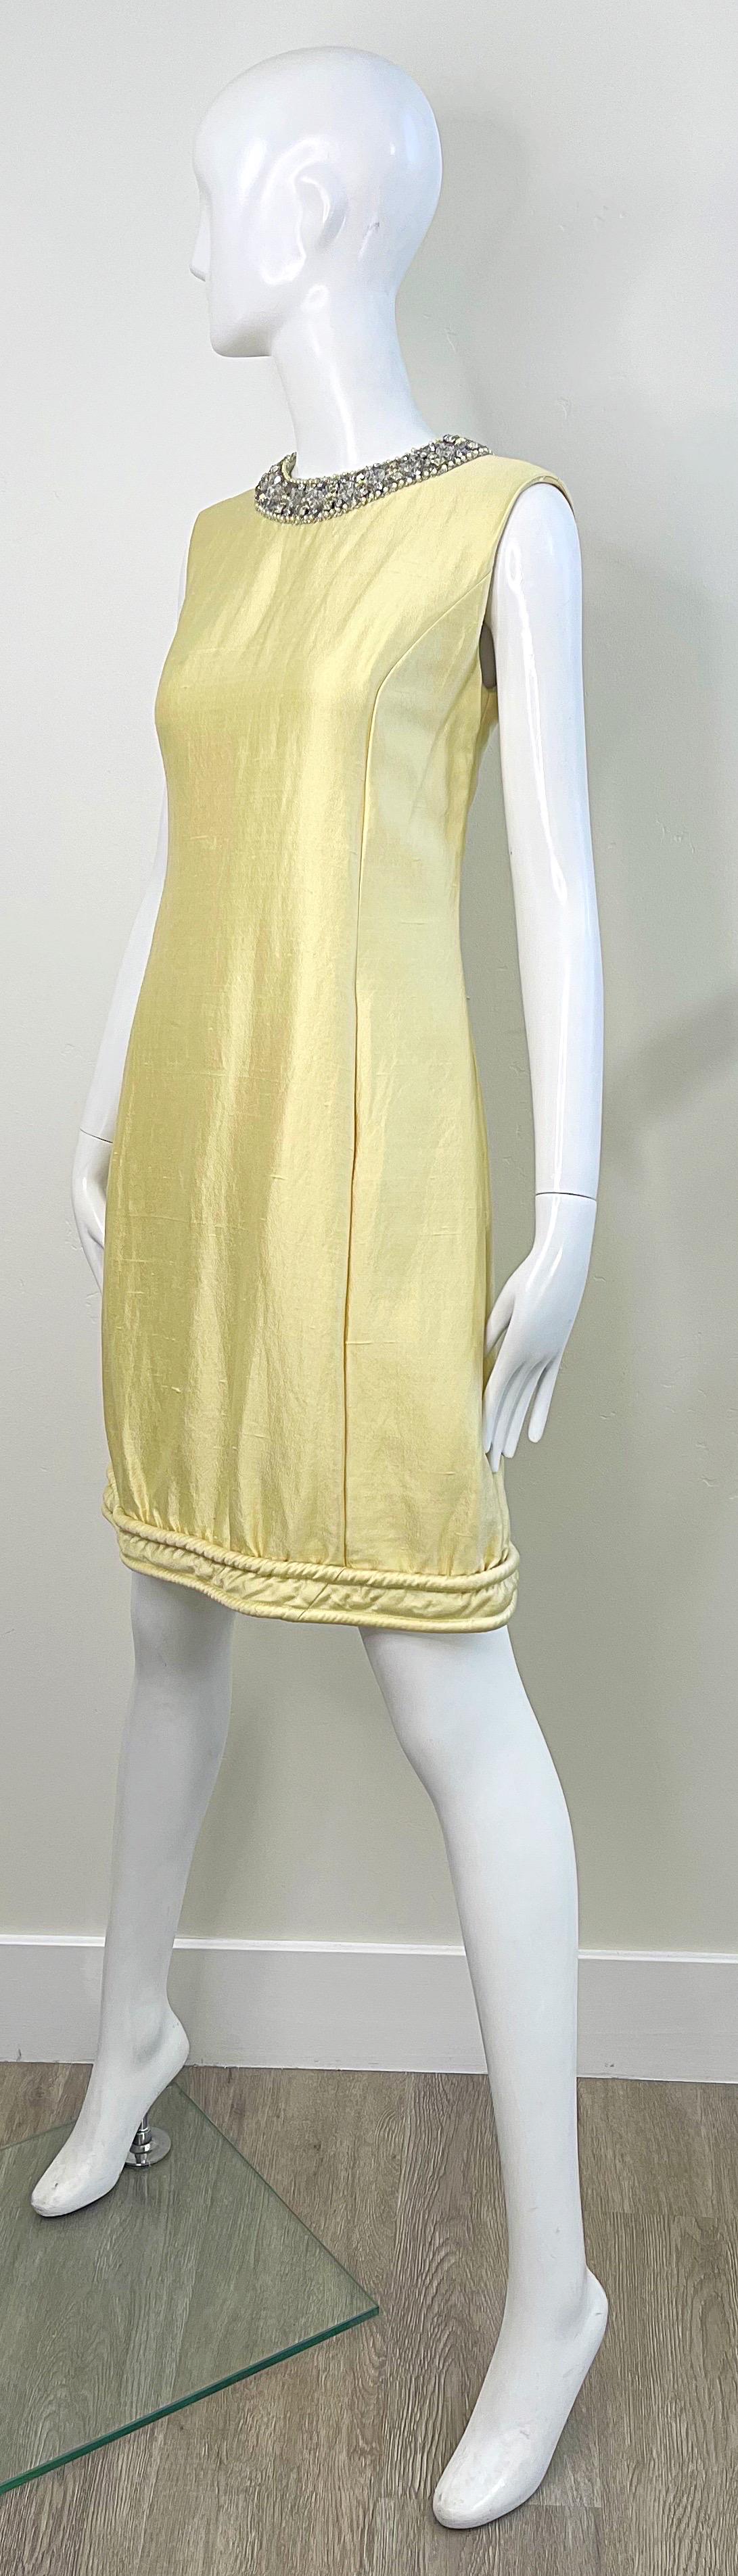 Chic 1960s Pale Yellow Silk Shantung Rhinestone Beaded Vintage 60s Shift Dress For Sale 1